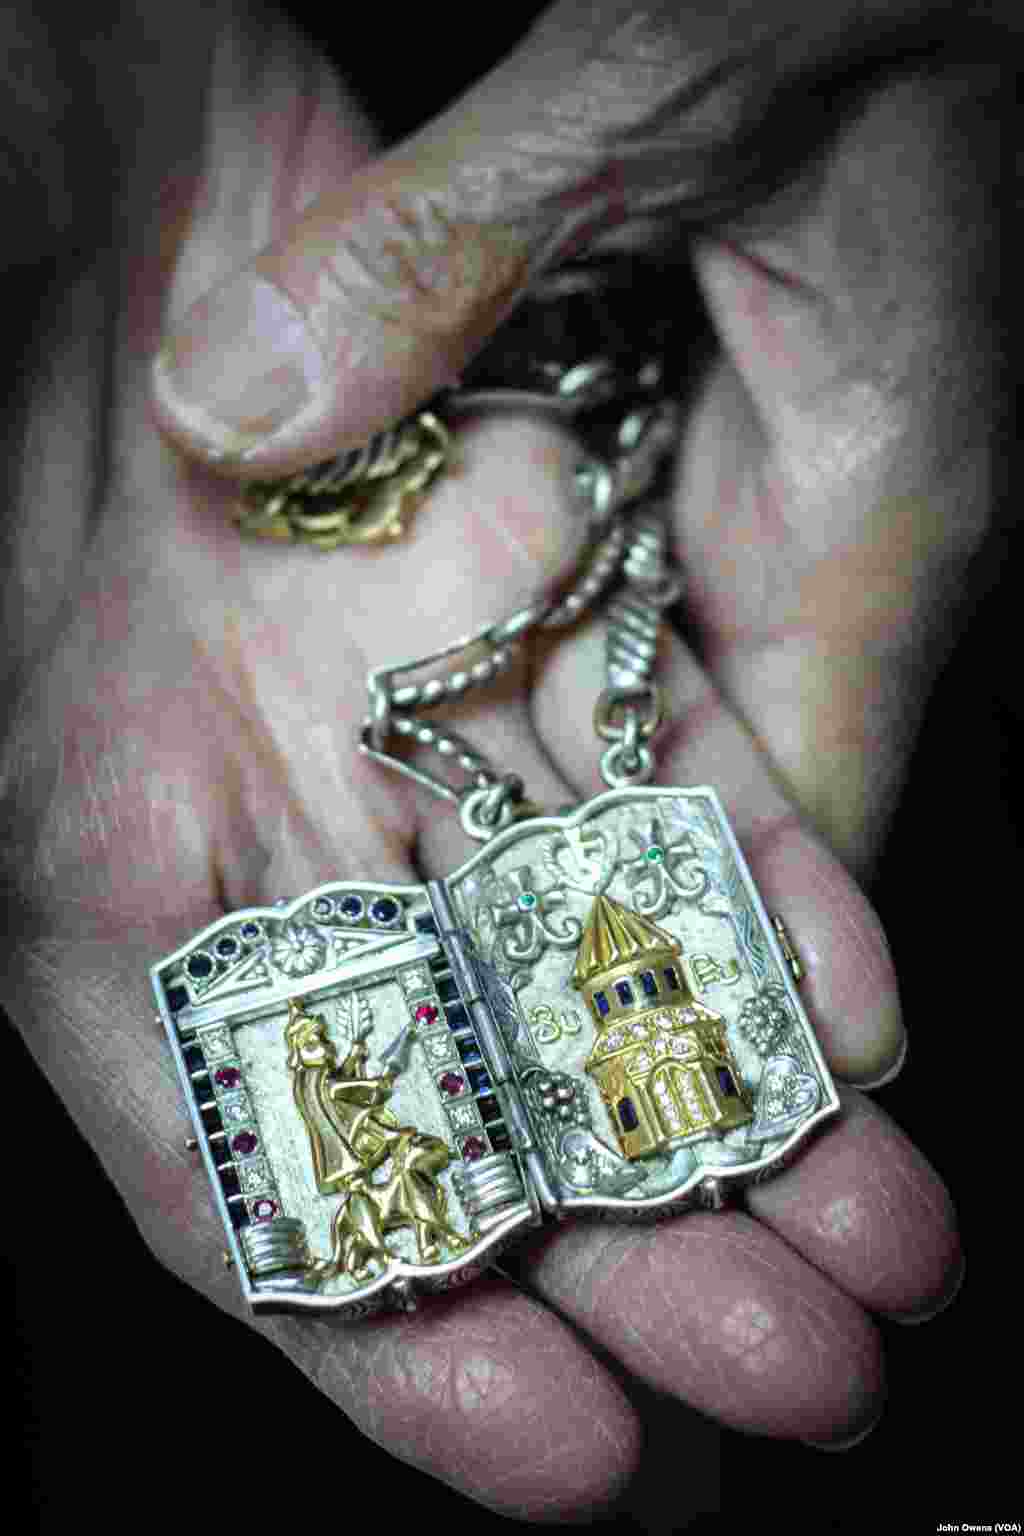 Master jeweler Hrayr Dserounian shows one of the recent pieces he has crafted, in Beirut, Lebanon, April 1, 2016. The iconography reflects Armenian history.